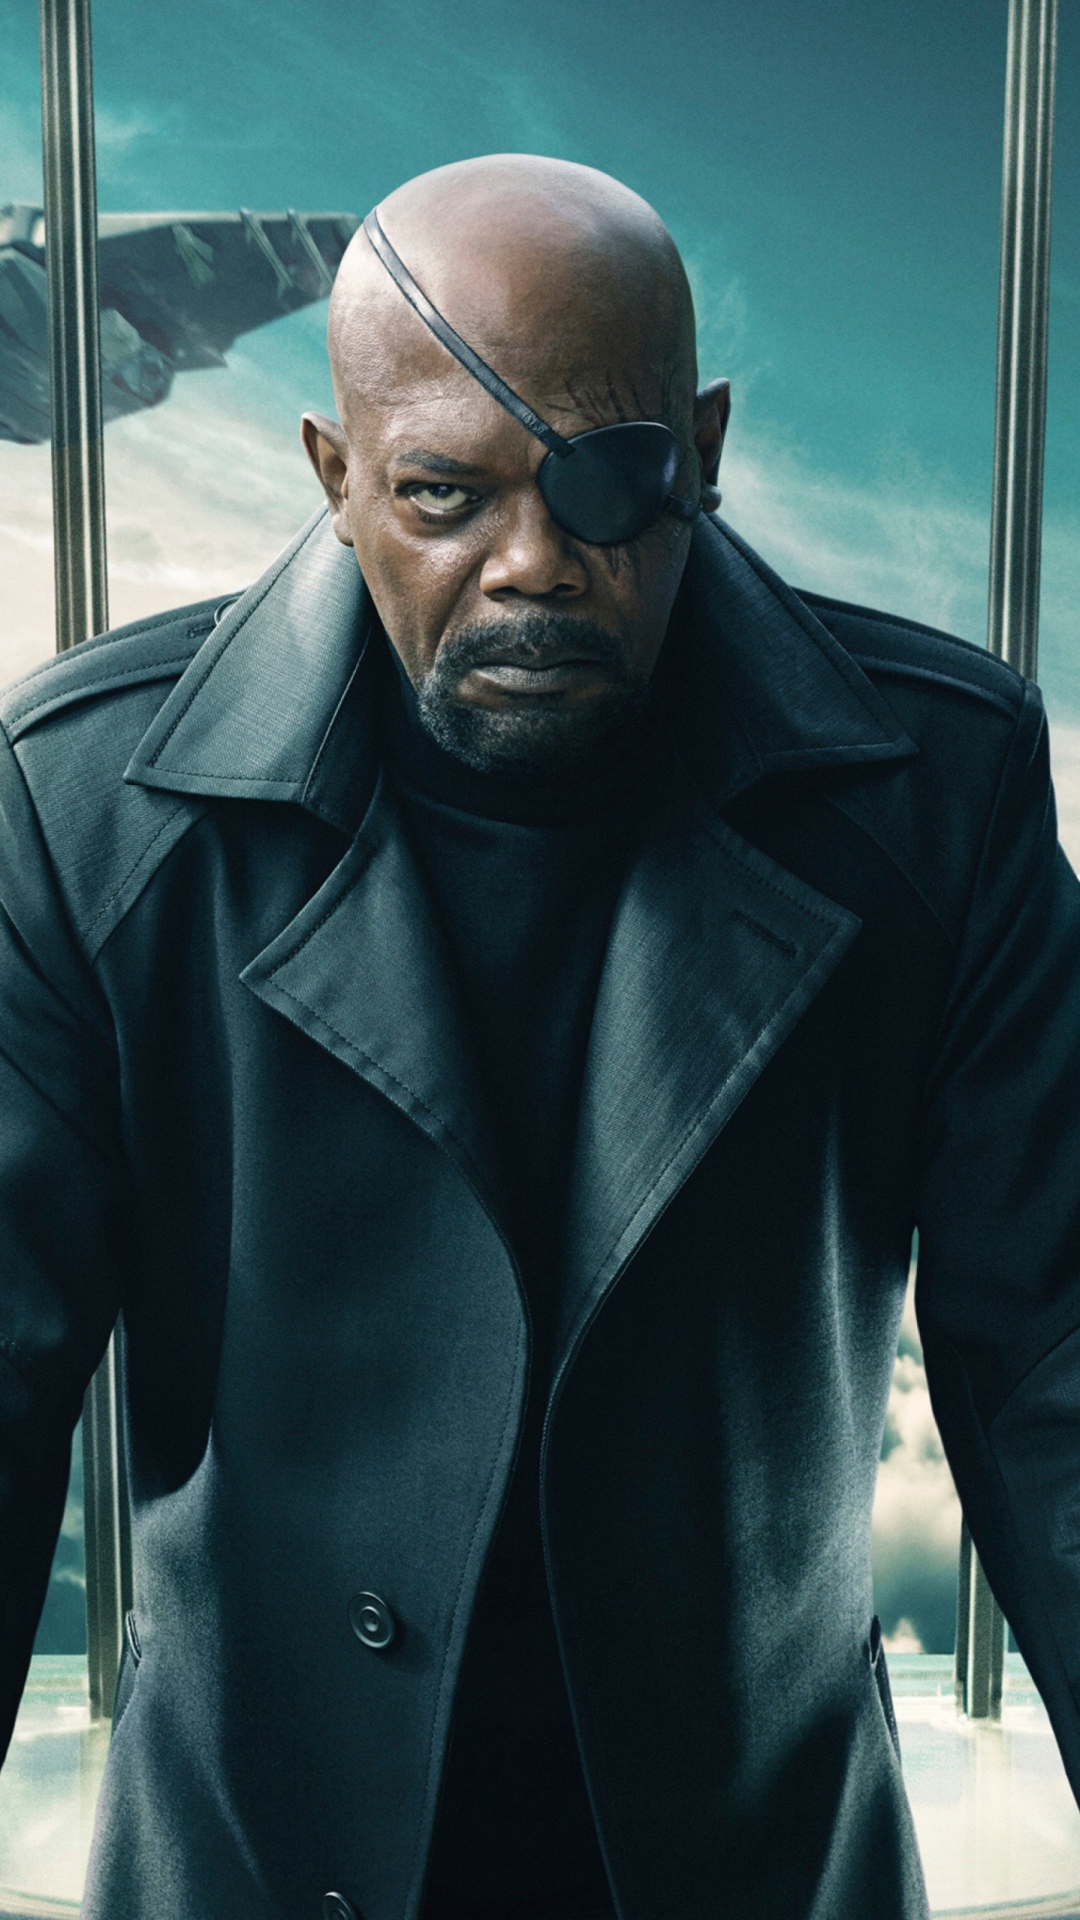 Nick Fury Captain America The Winter Soldier wallpaper 1080x1920